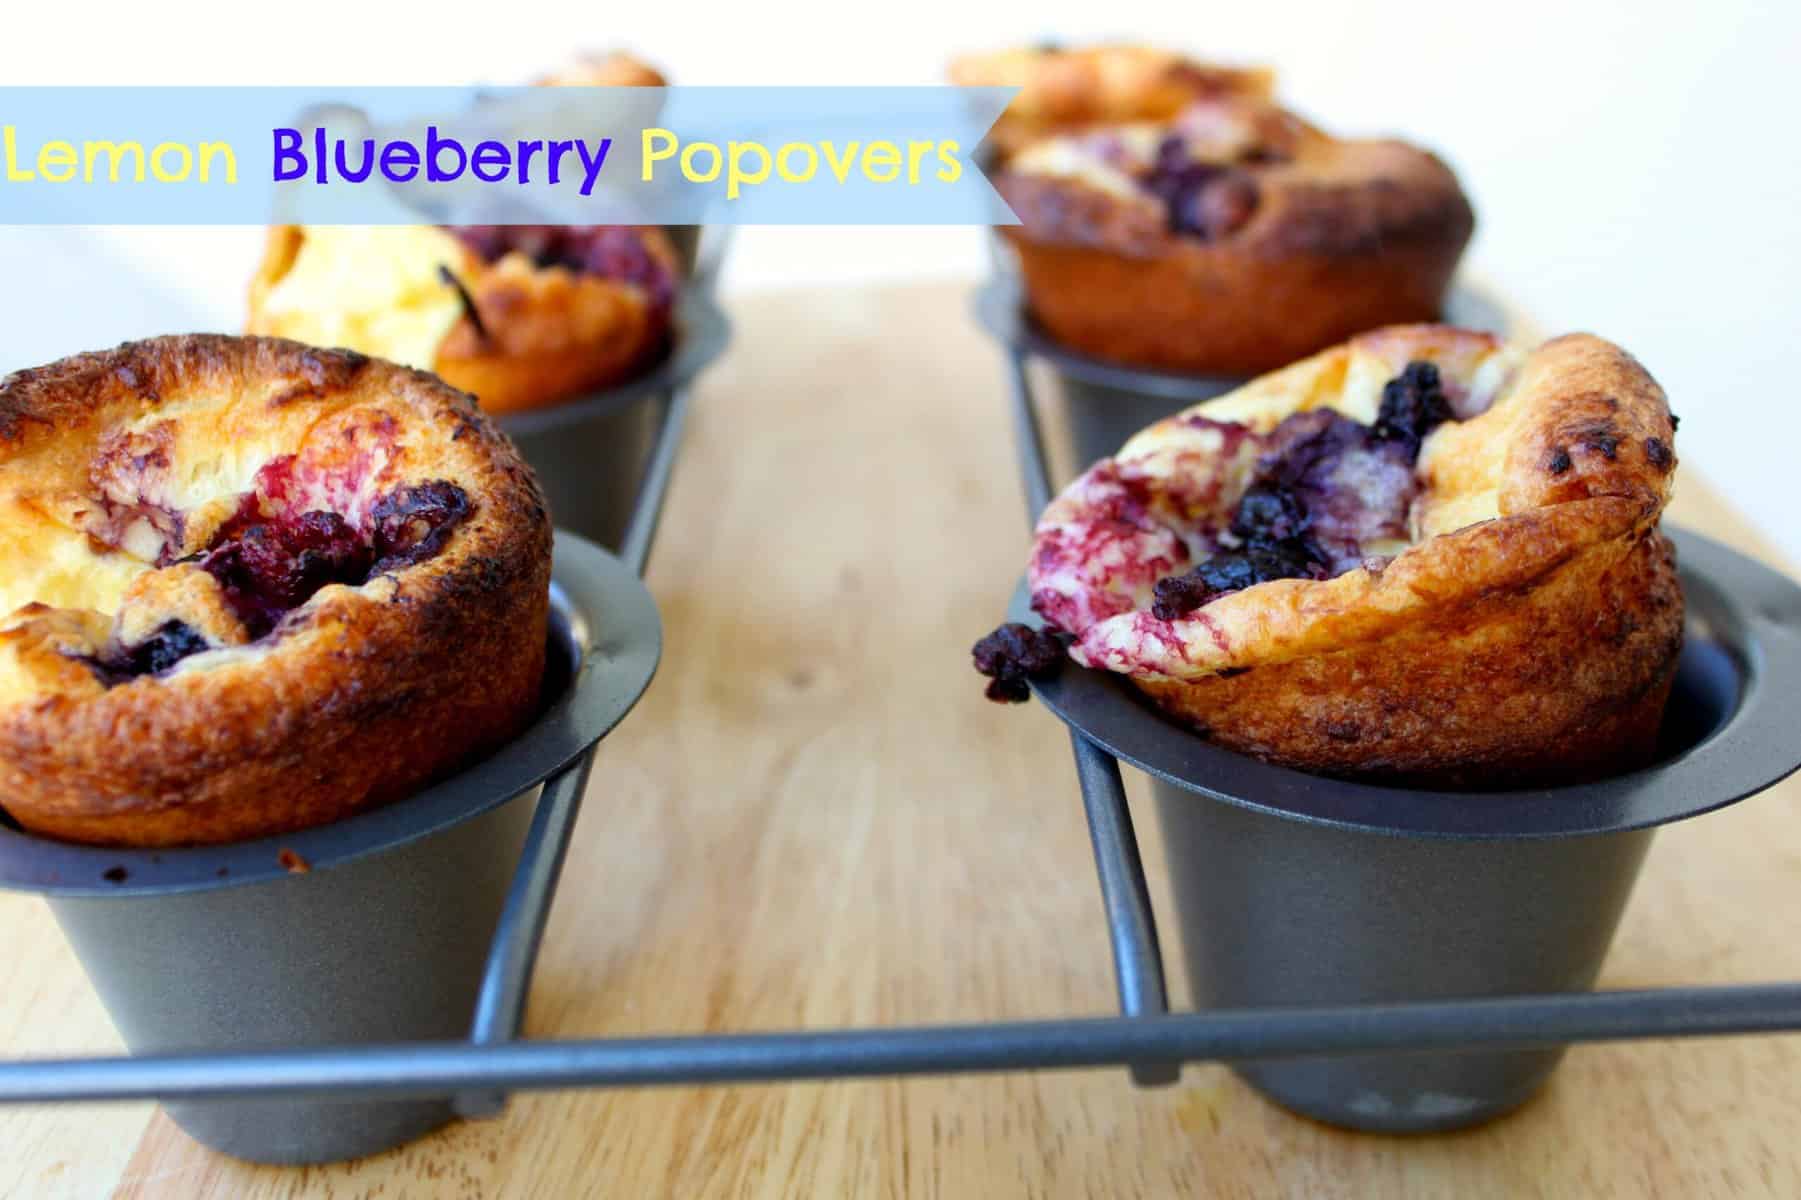  Golden brown and bursting with juicy blueberries.